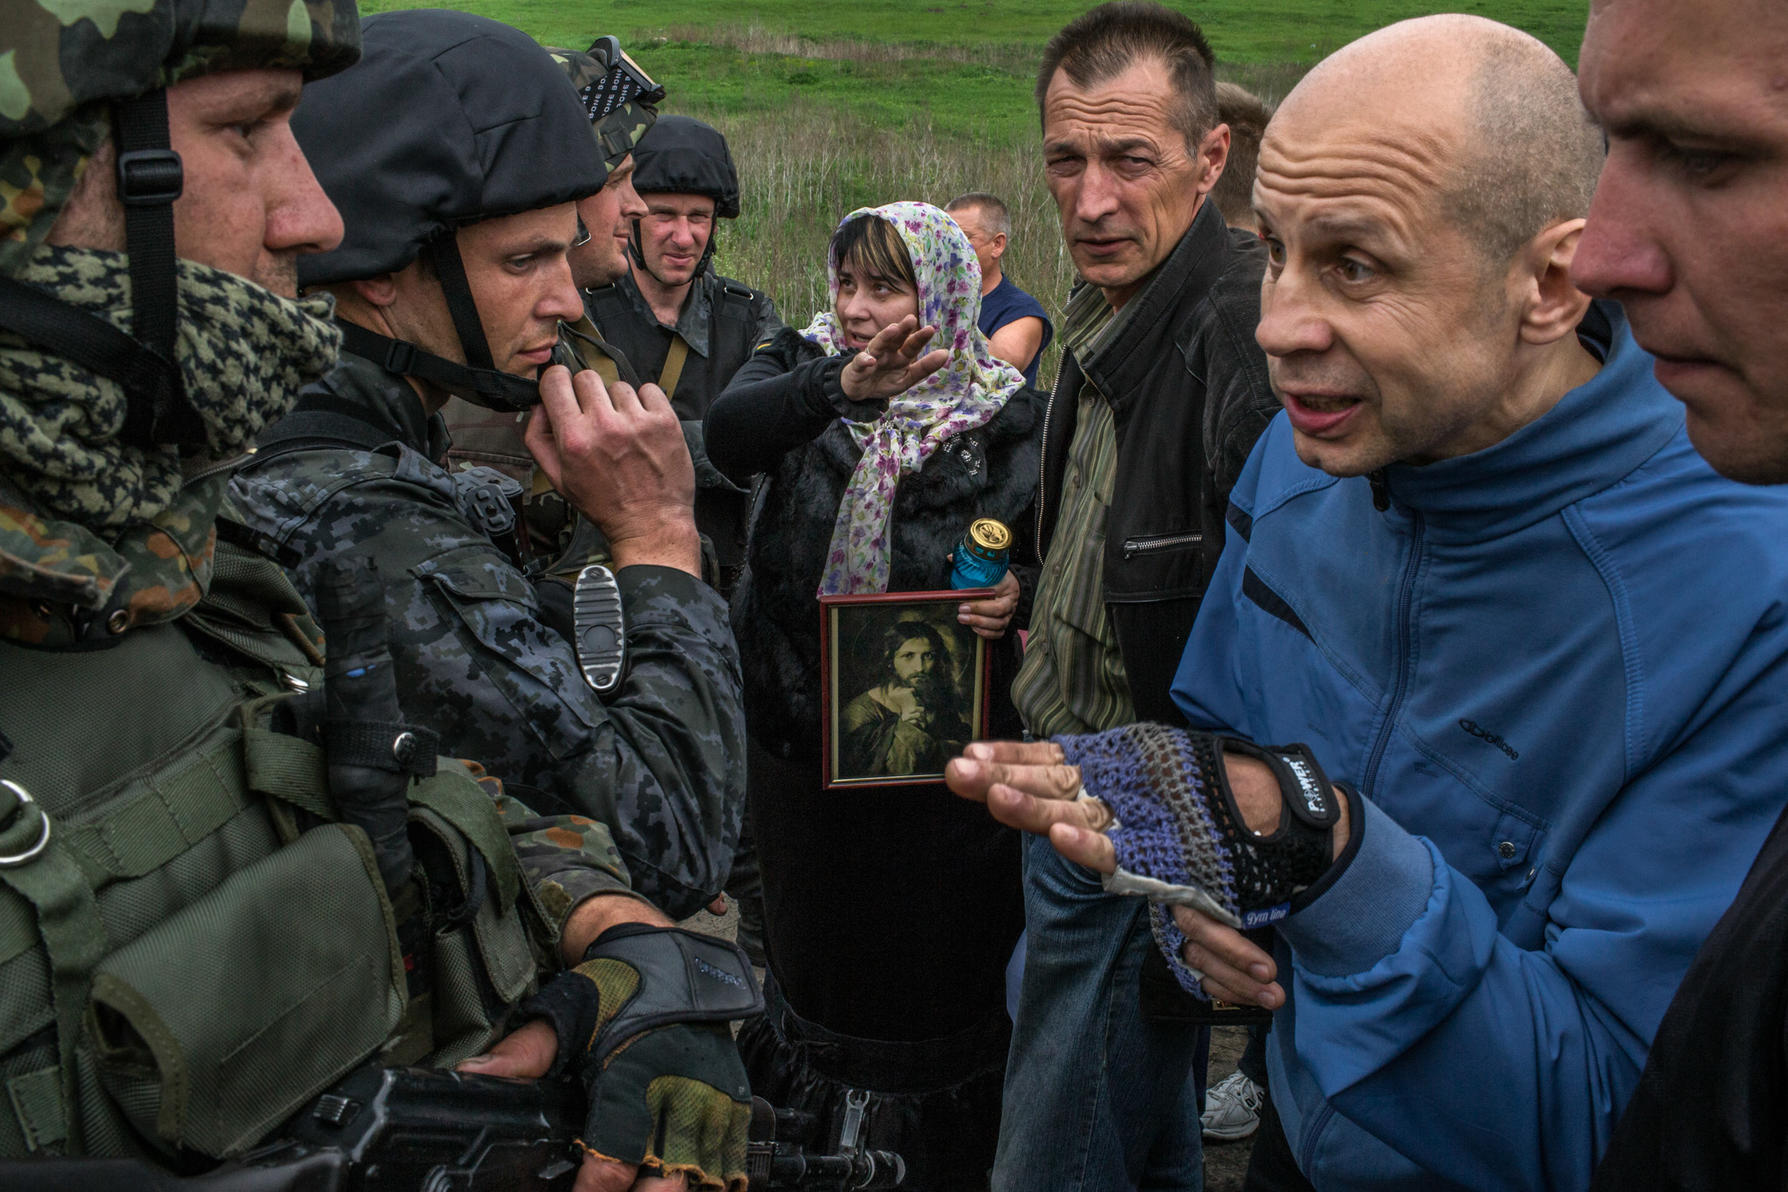 A pro-Russia villager argues with Ukrainian soldiers after troops were being blocked by villagers at a checkpoint in Slovyansk, Ukraine, May 2, 2014